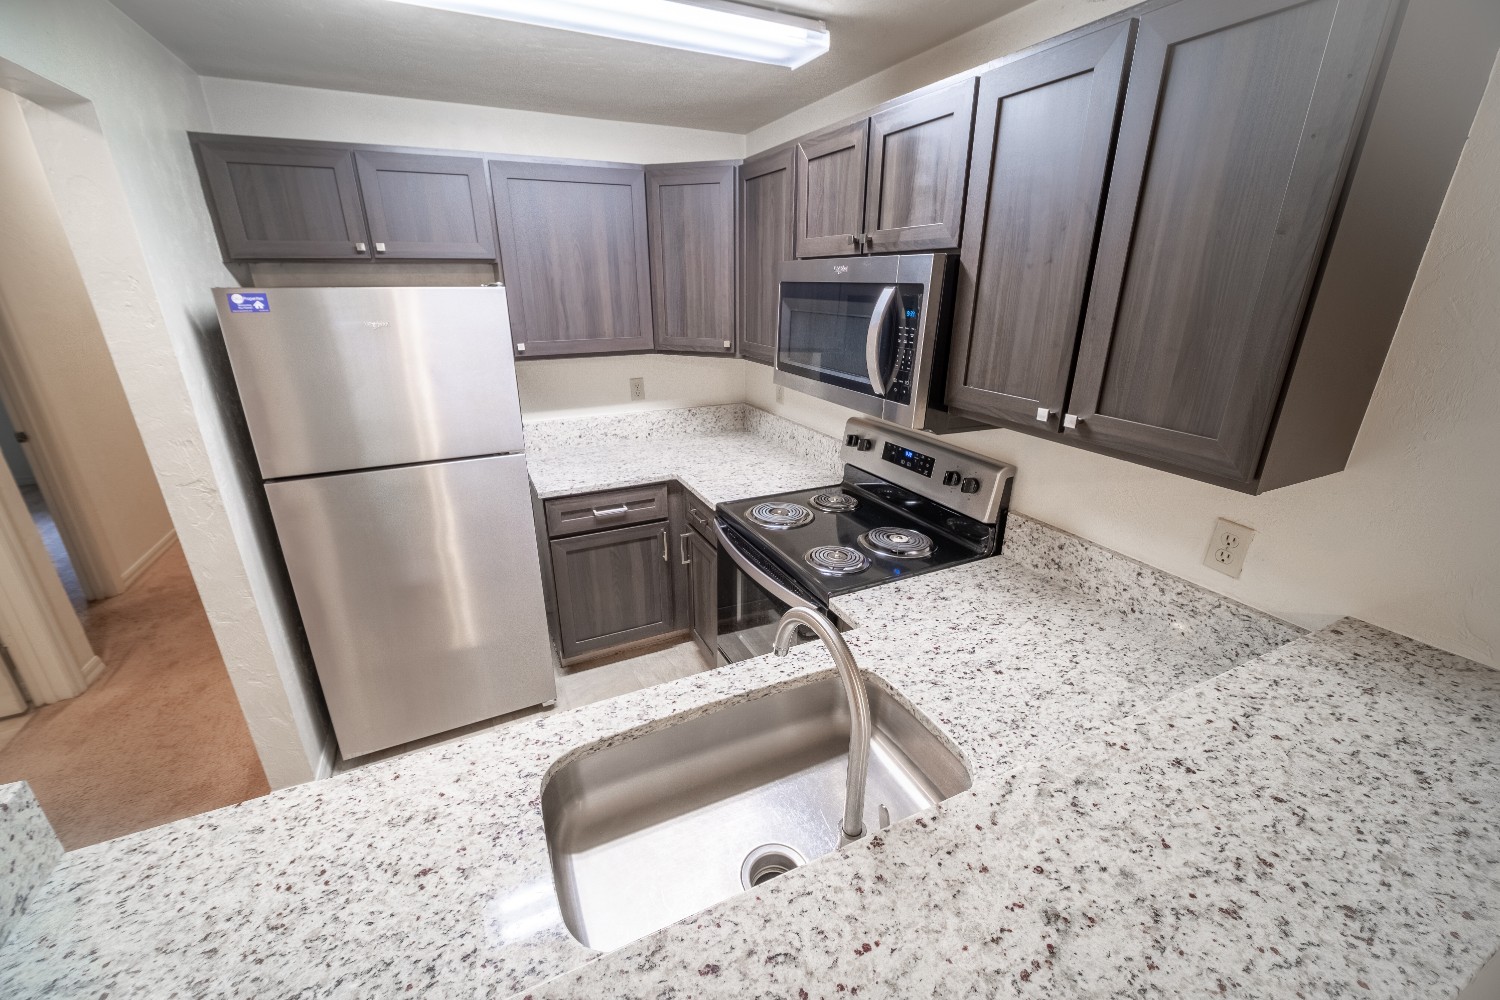 3 Bedroom kitchen with granite countertops and stainless steel appliances